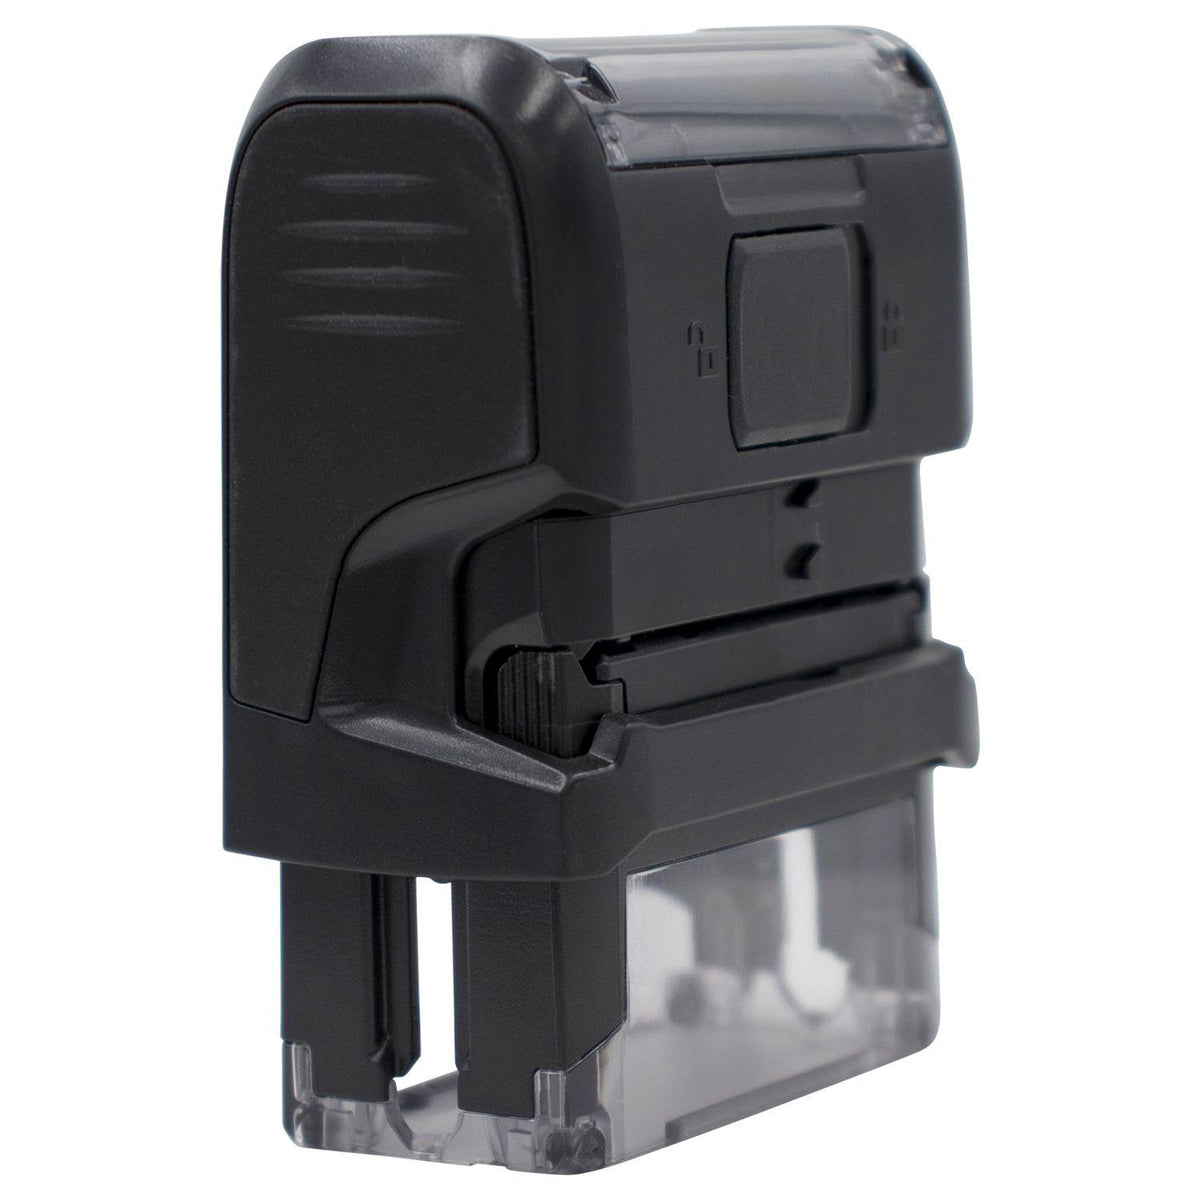 Large Self Inking Damages Stamp - Engineer Seal Stamps - Brand_Trodat, Impression Size_Large, Stamp Type_Self-Inking Stamp, Type of Use_Postal &amp; Mailing, Type of Use_Shipping &amp; Receiving